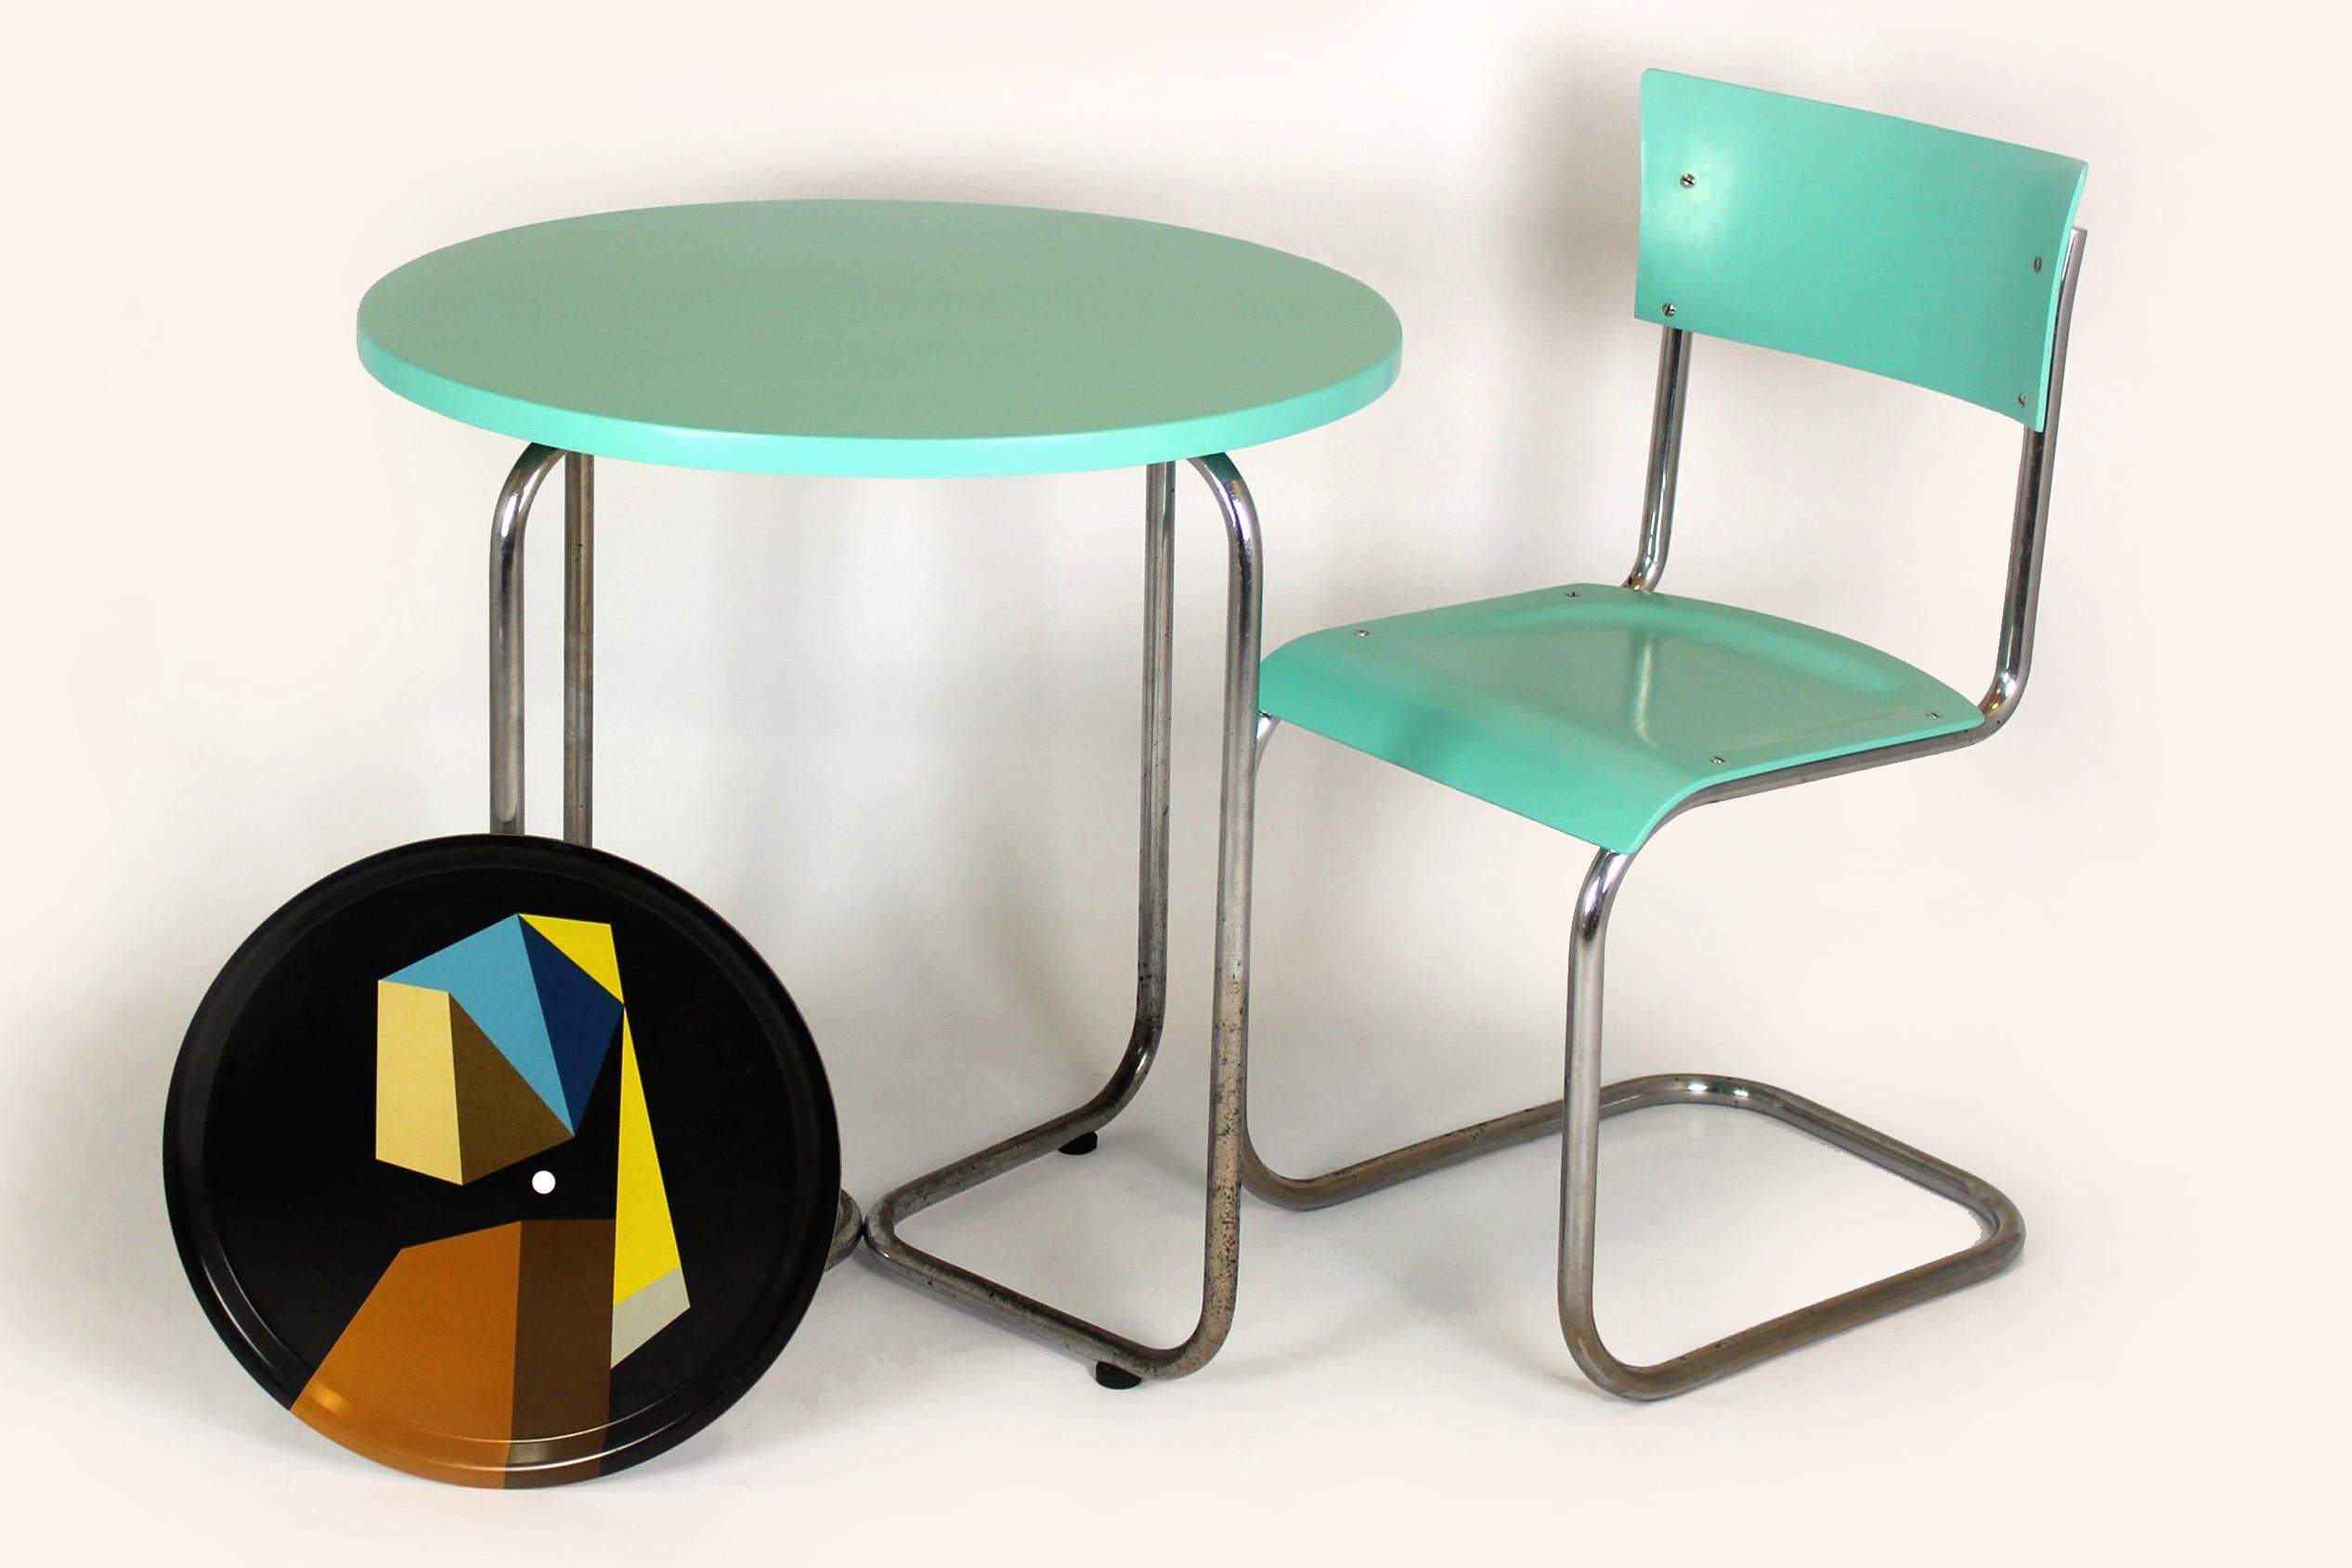 Bauhaus Tubular Steel Set, Round Table and Chair by Mart Stam, 1930s For Sale 2